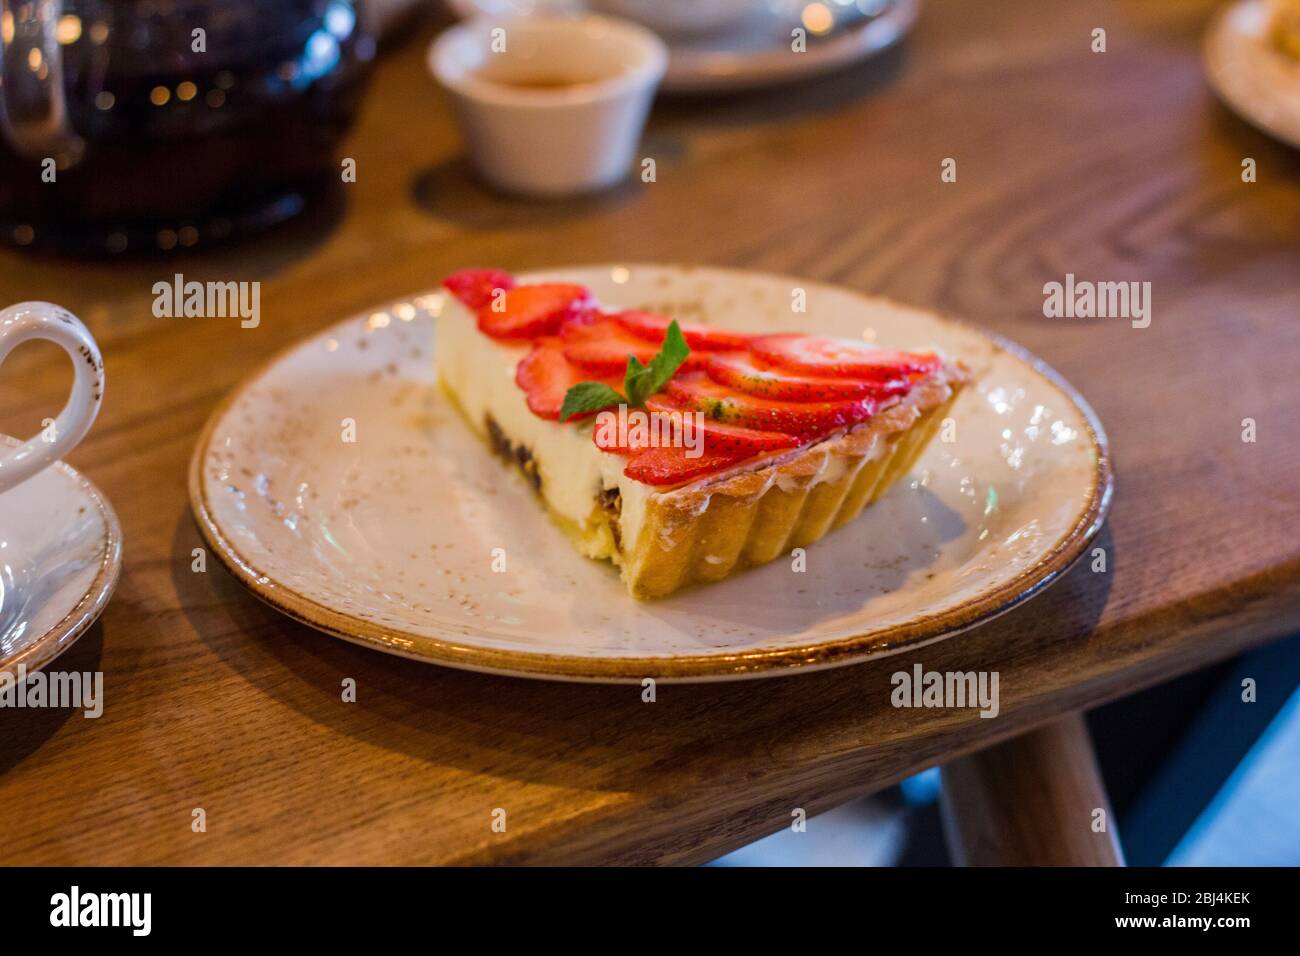 A piece of cheesecake with strawberries and mint leaves on a plate Stock Photo